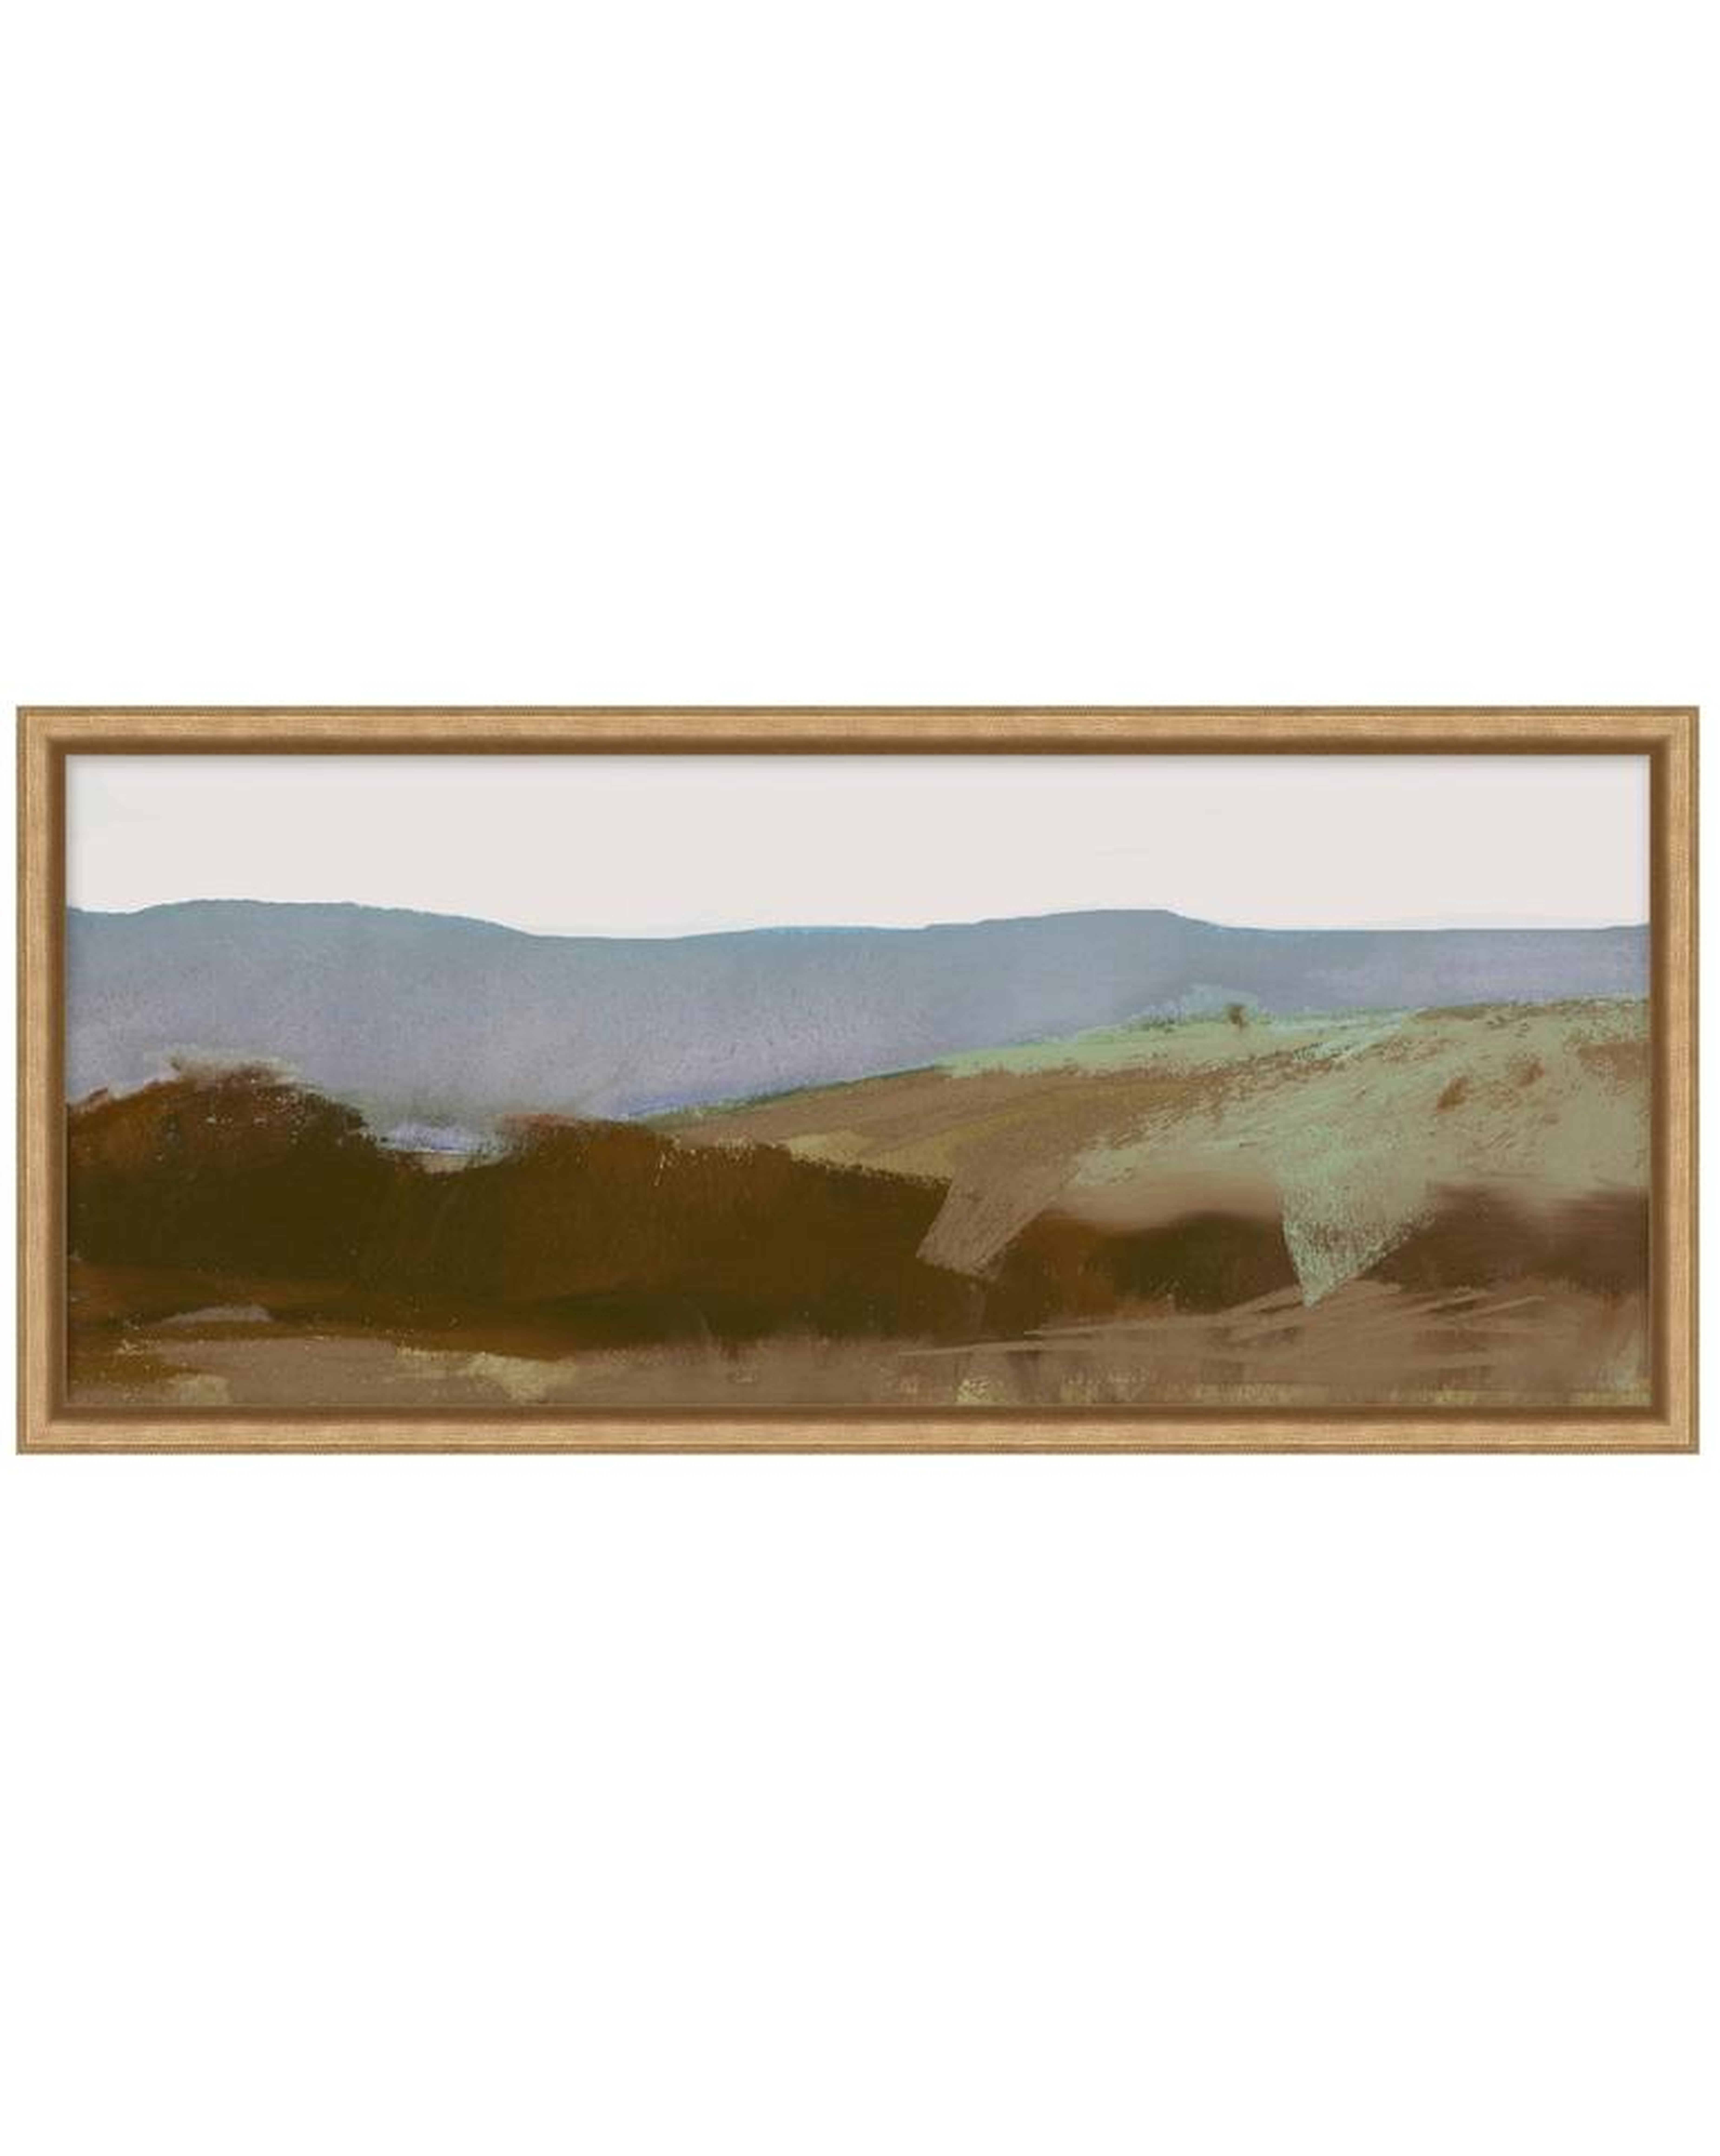 ABSTRACT LANDSCAPE 1 Framed Art - Small - McGee & Co.